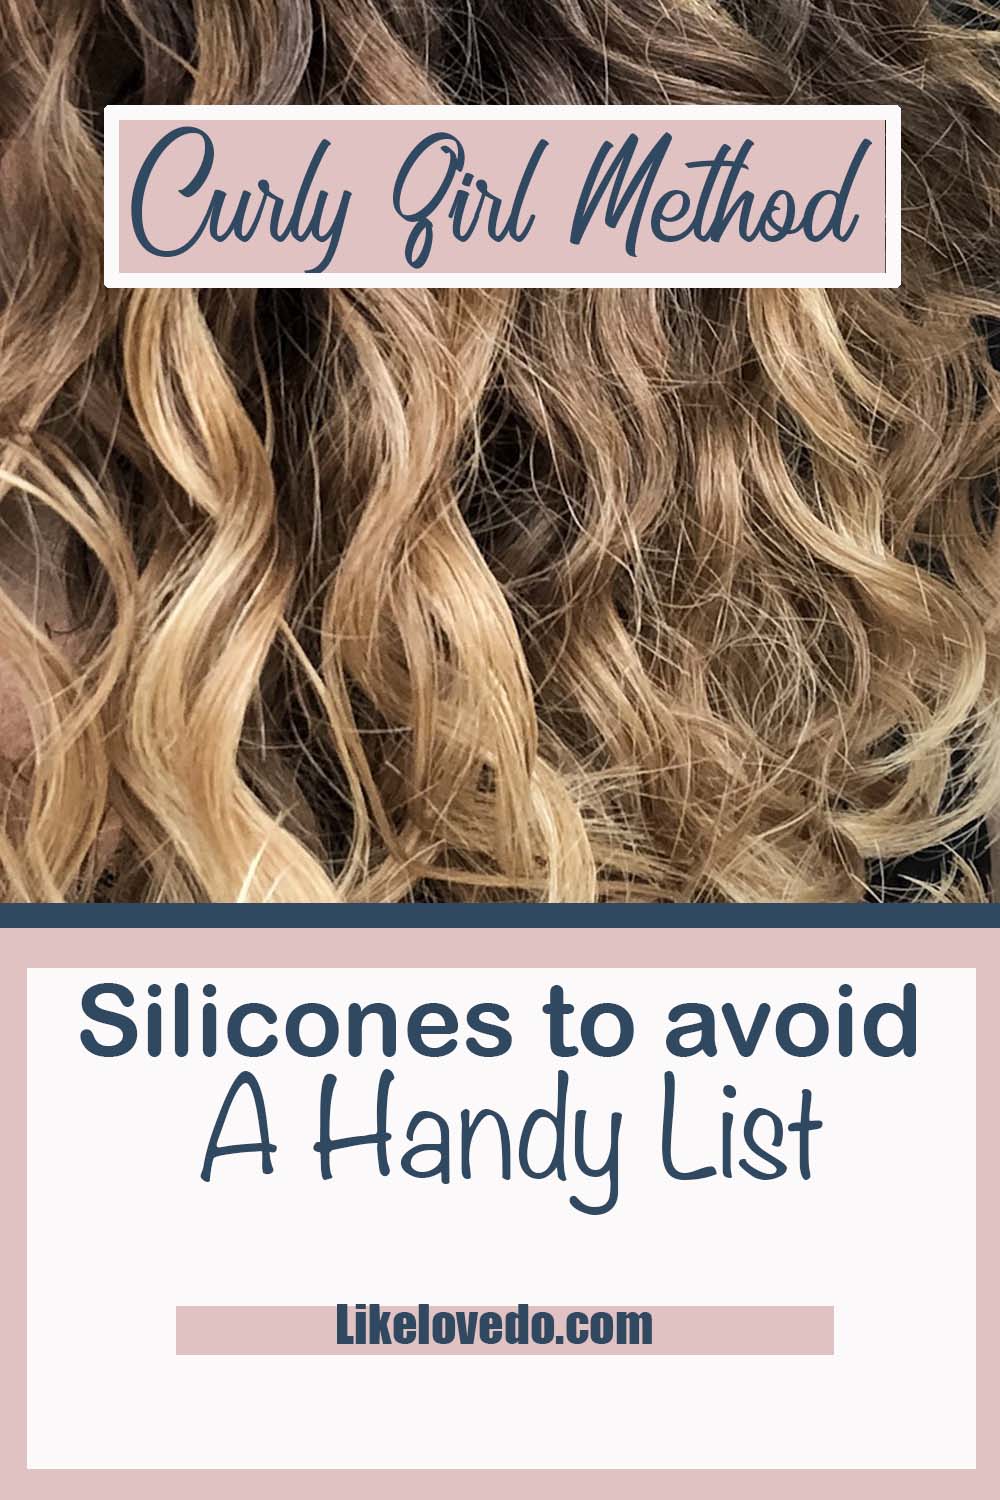 Curly Girl method silcones to avoid ( handy infographic ) - Like Love Do